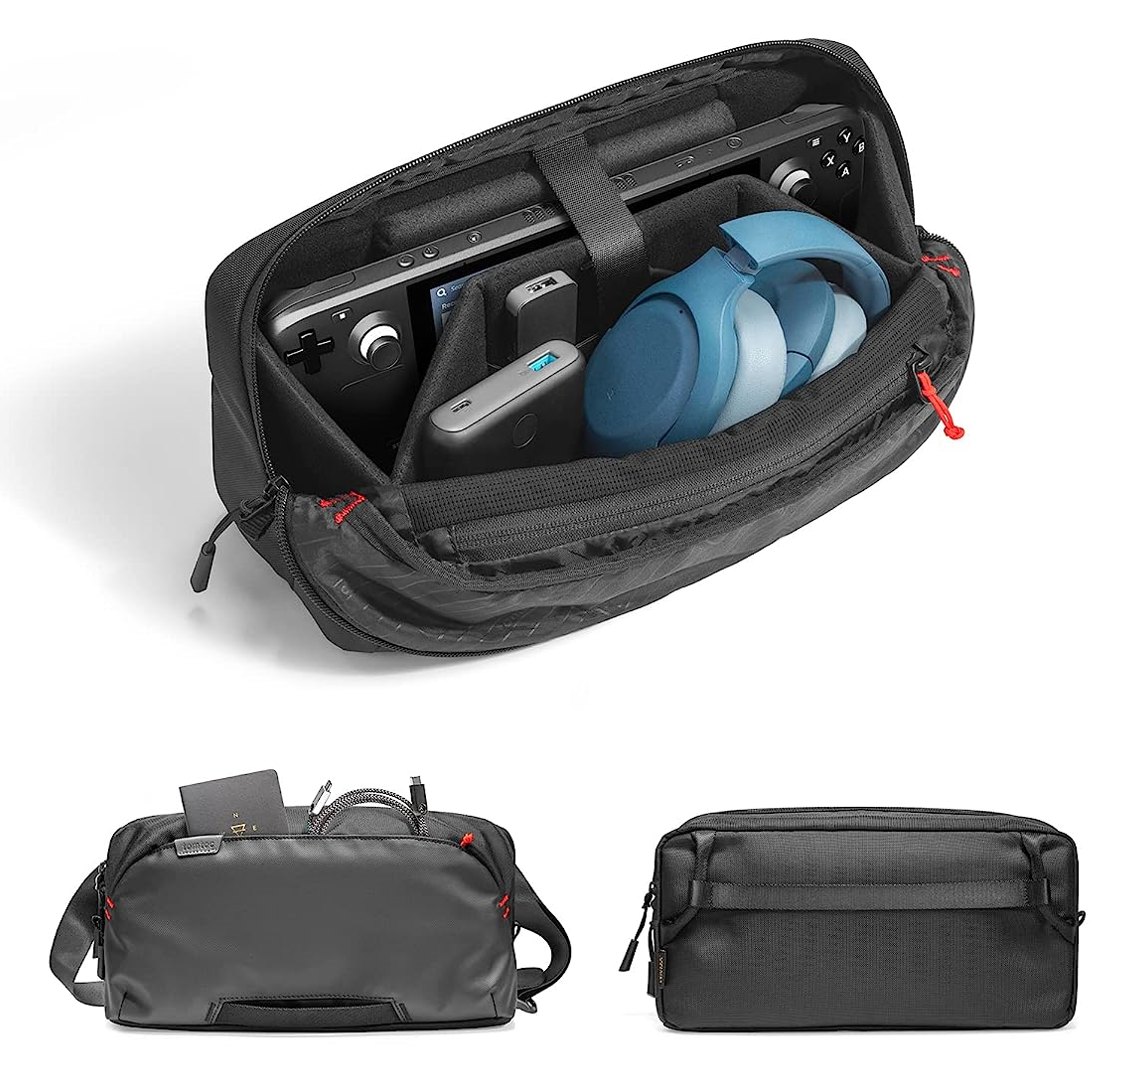 tomtoc travel bag review